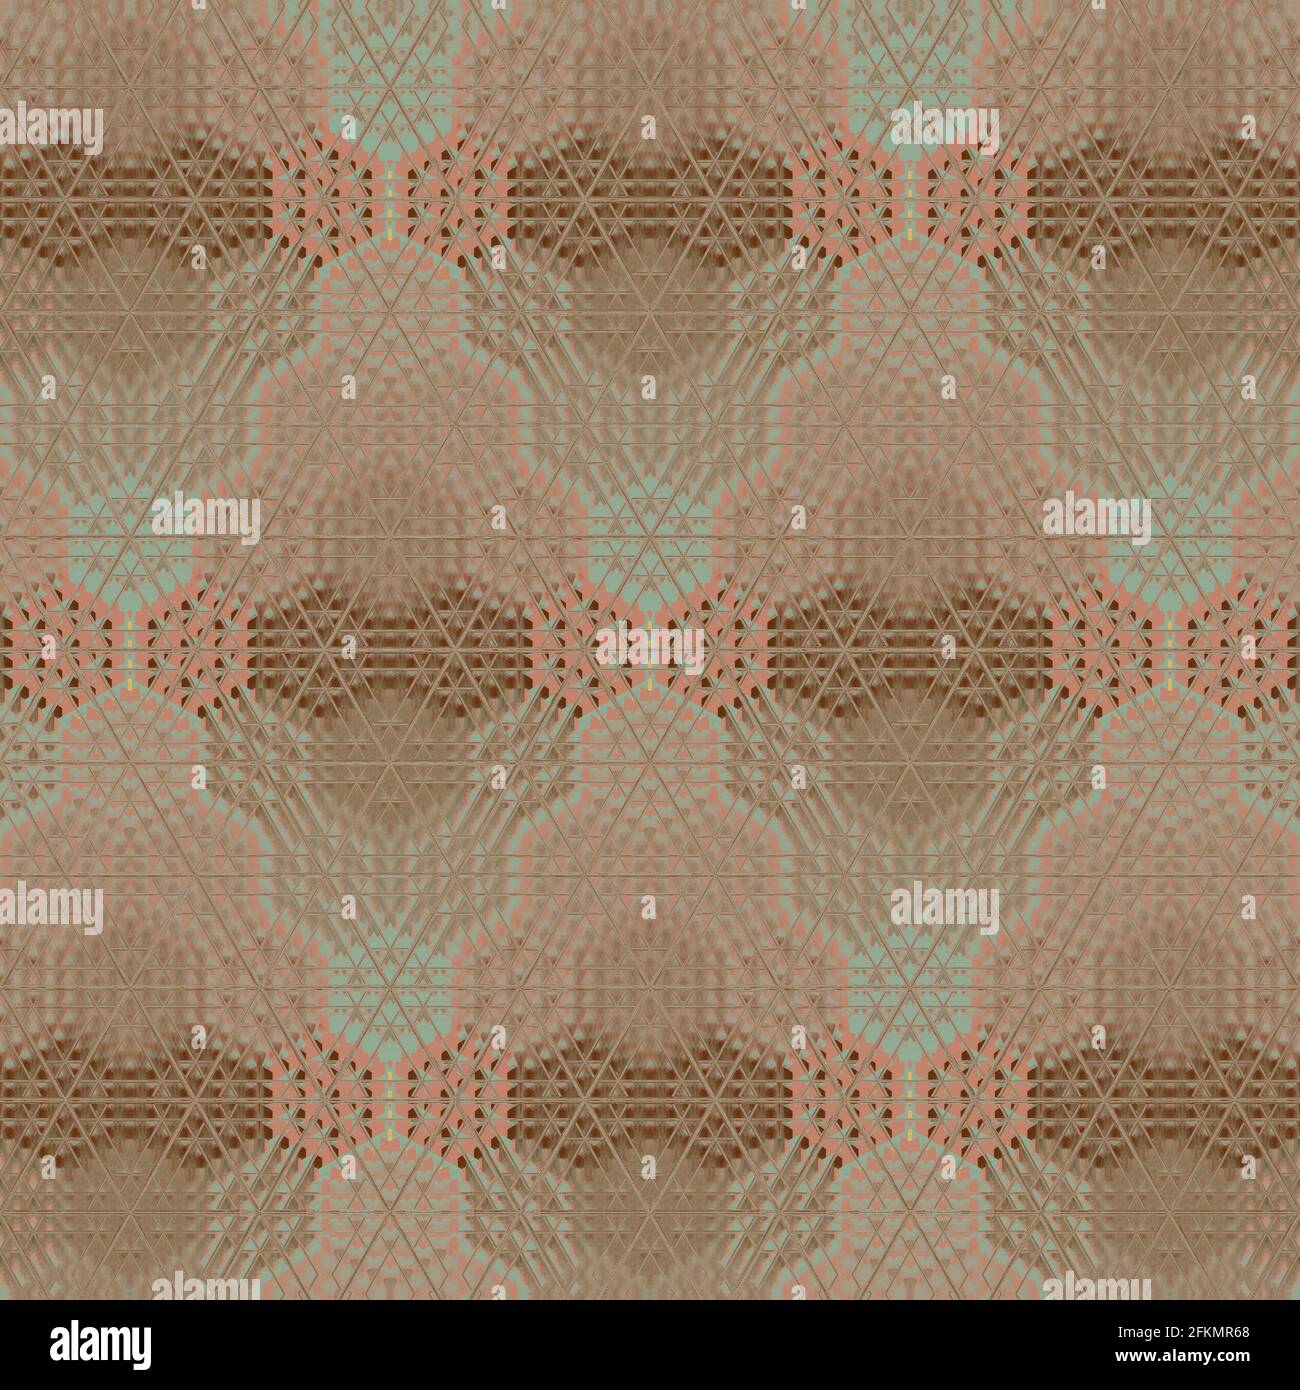 Modern design for printing on textile. Abstract pattern background to decorate interior accessories Stock Photo